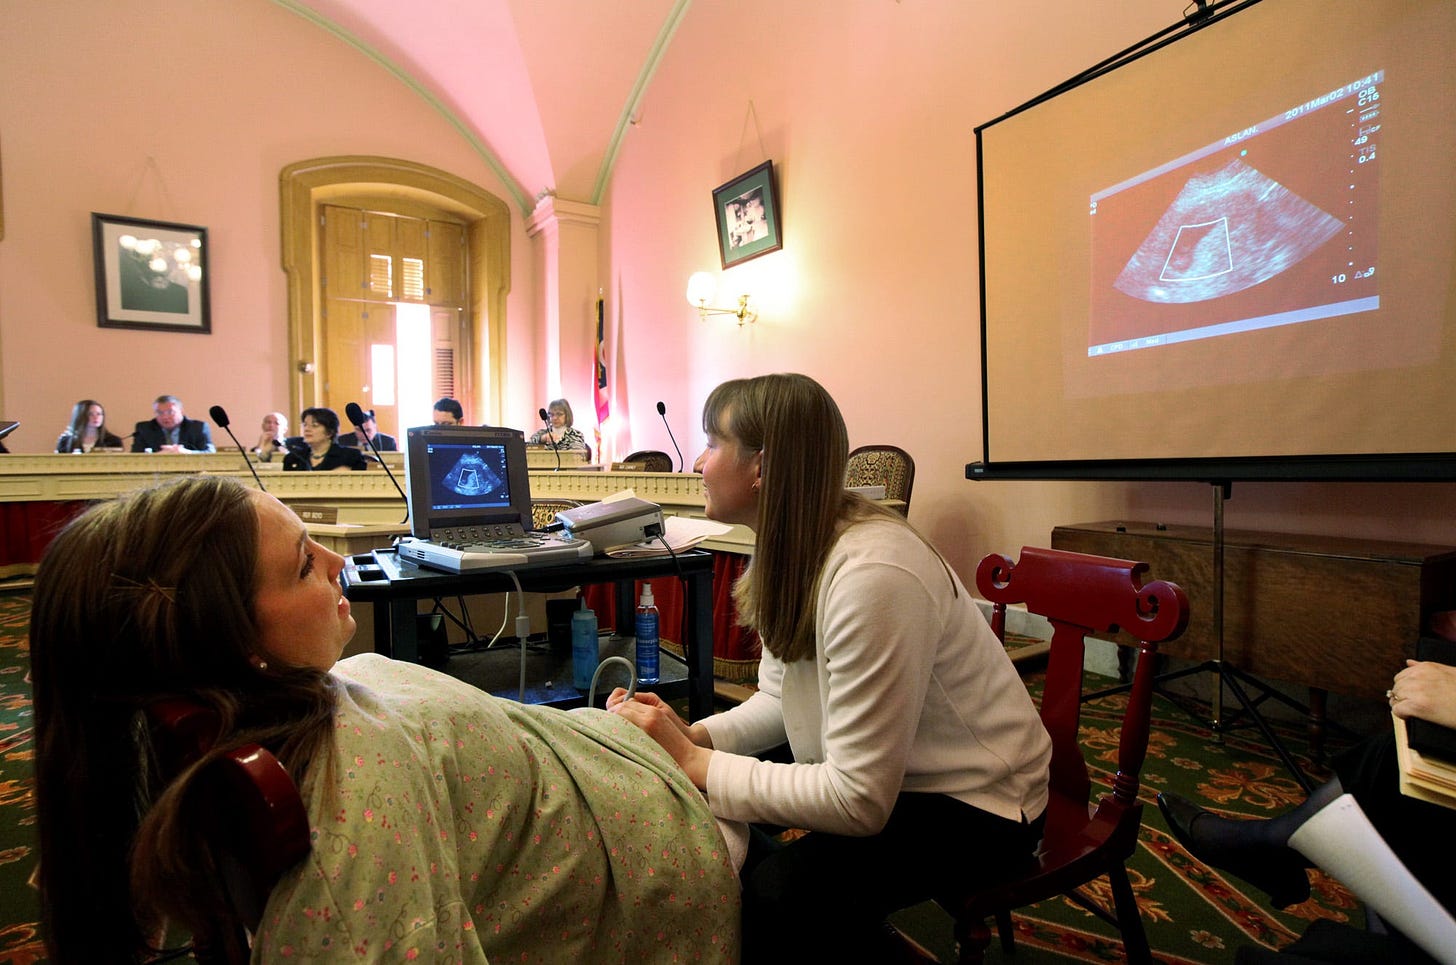 A pregnant Erin Glockner, left, is given an ultrasound by Julie Aber of Ashland Care Center during a committee hearing at the Ohio Statehouse in 2011. Anti-abortion advocates presented live ultrasounds to lawmakers in support of a bill that would outlaw abortion when cardiac activity can be detected.